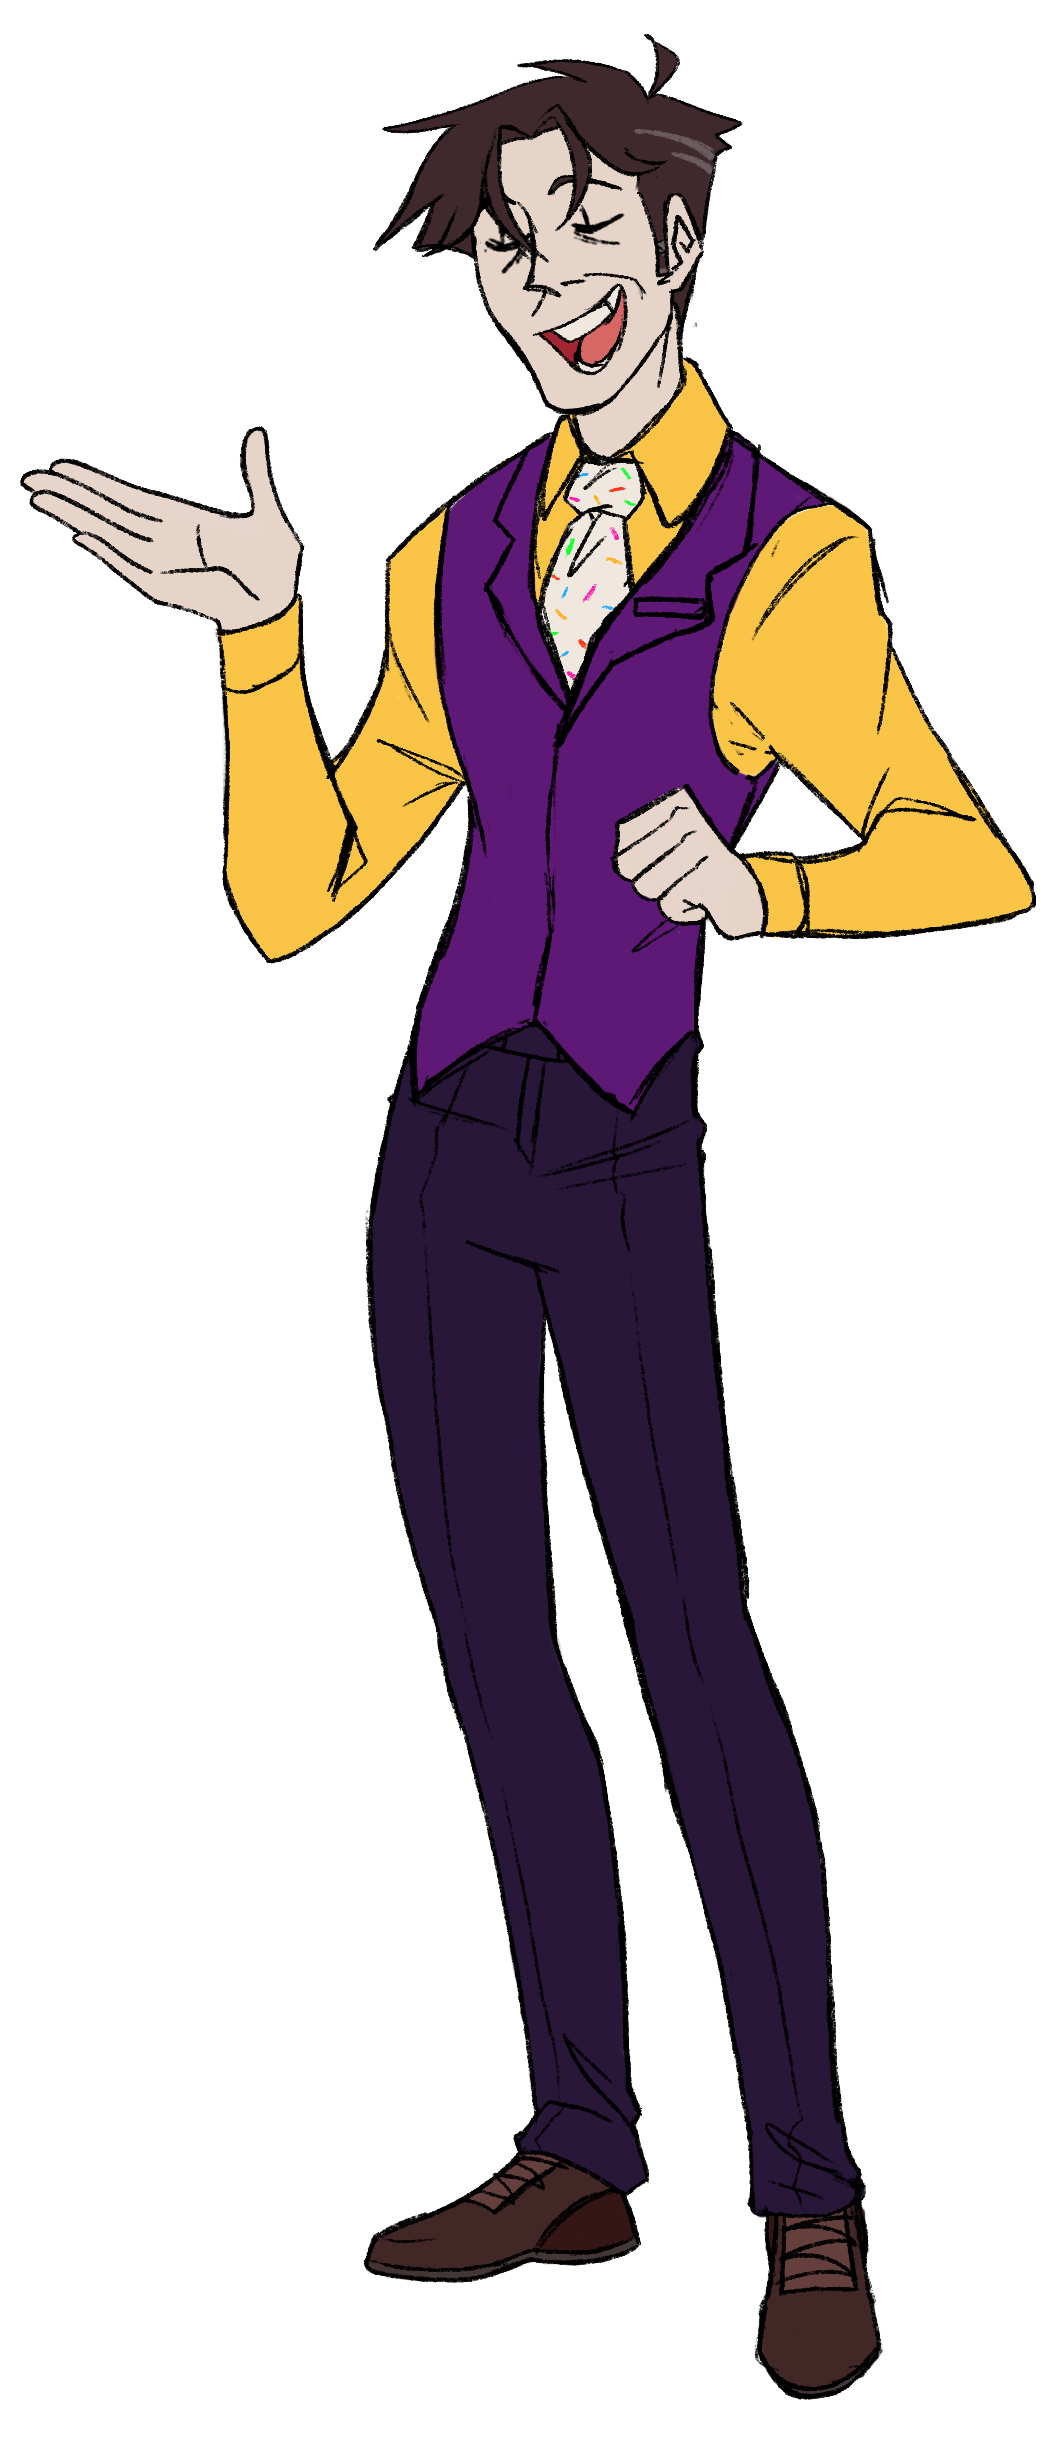 william afton wearing a purple waistcoat, yellow dress shirt, and a white confetti tie